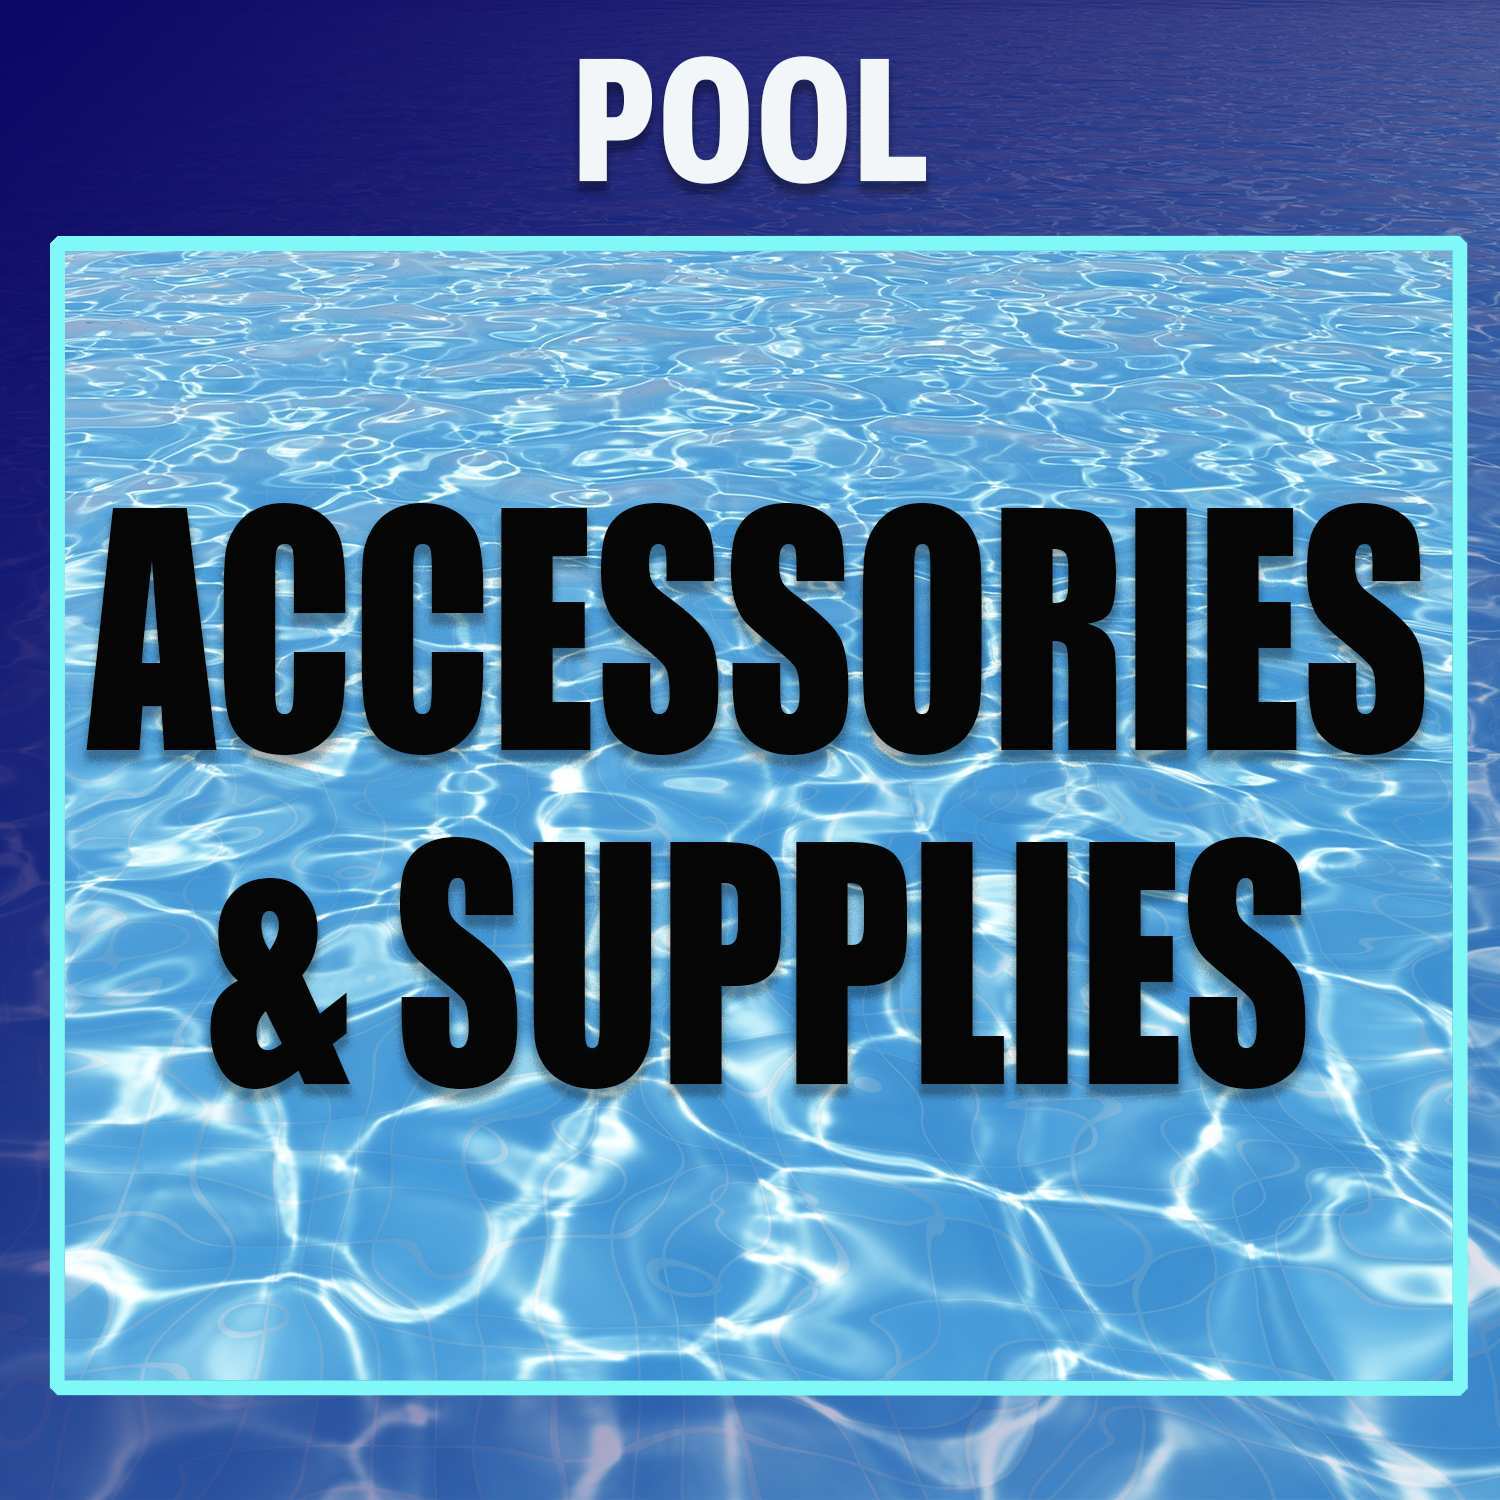 Pool Accessories and Supplies